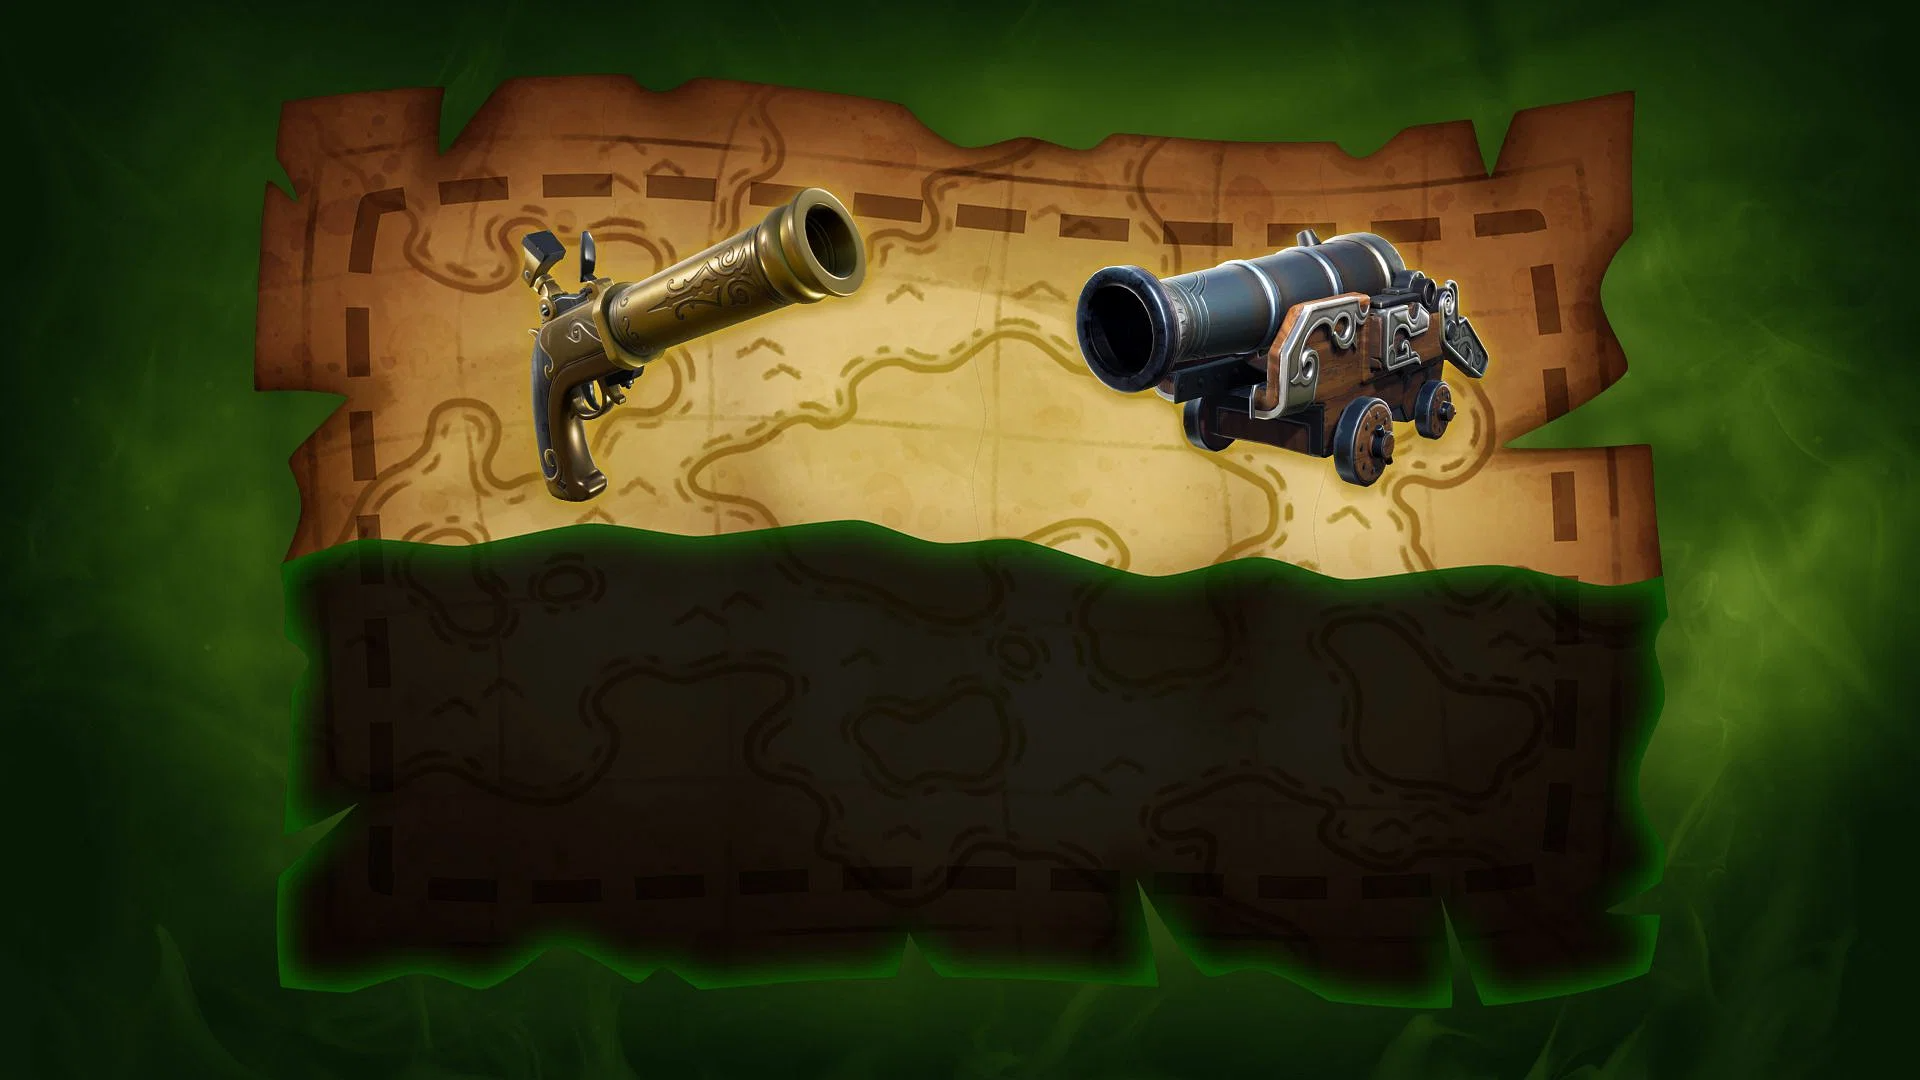 Fortnite to Reintroduce Pirate Cannons in Pirates of the Caribbean Crossover